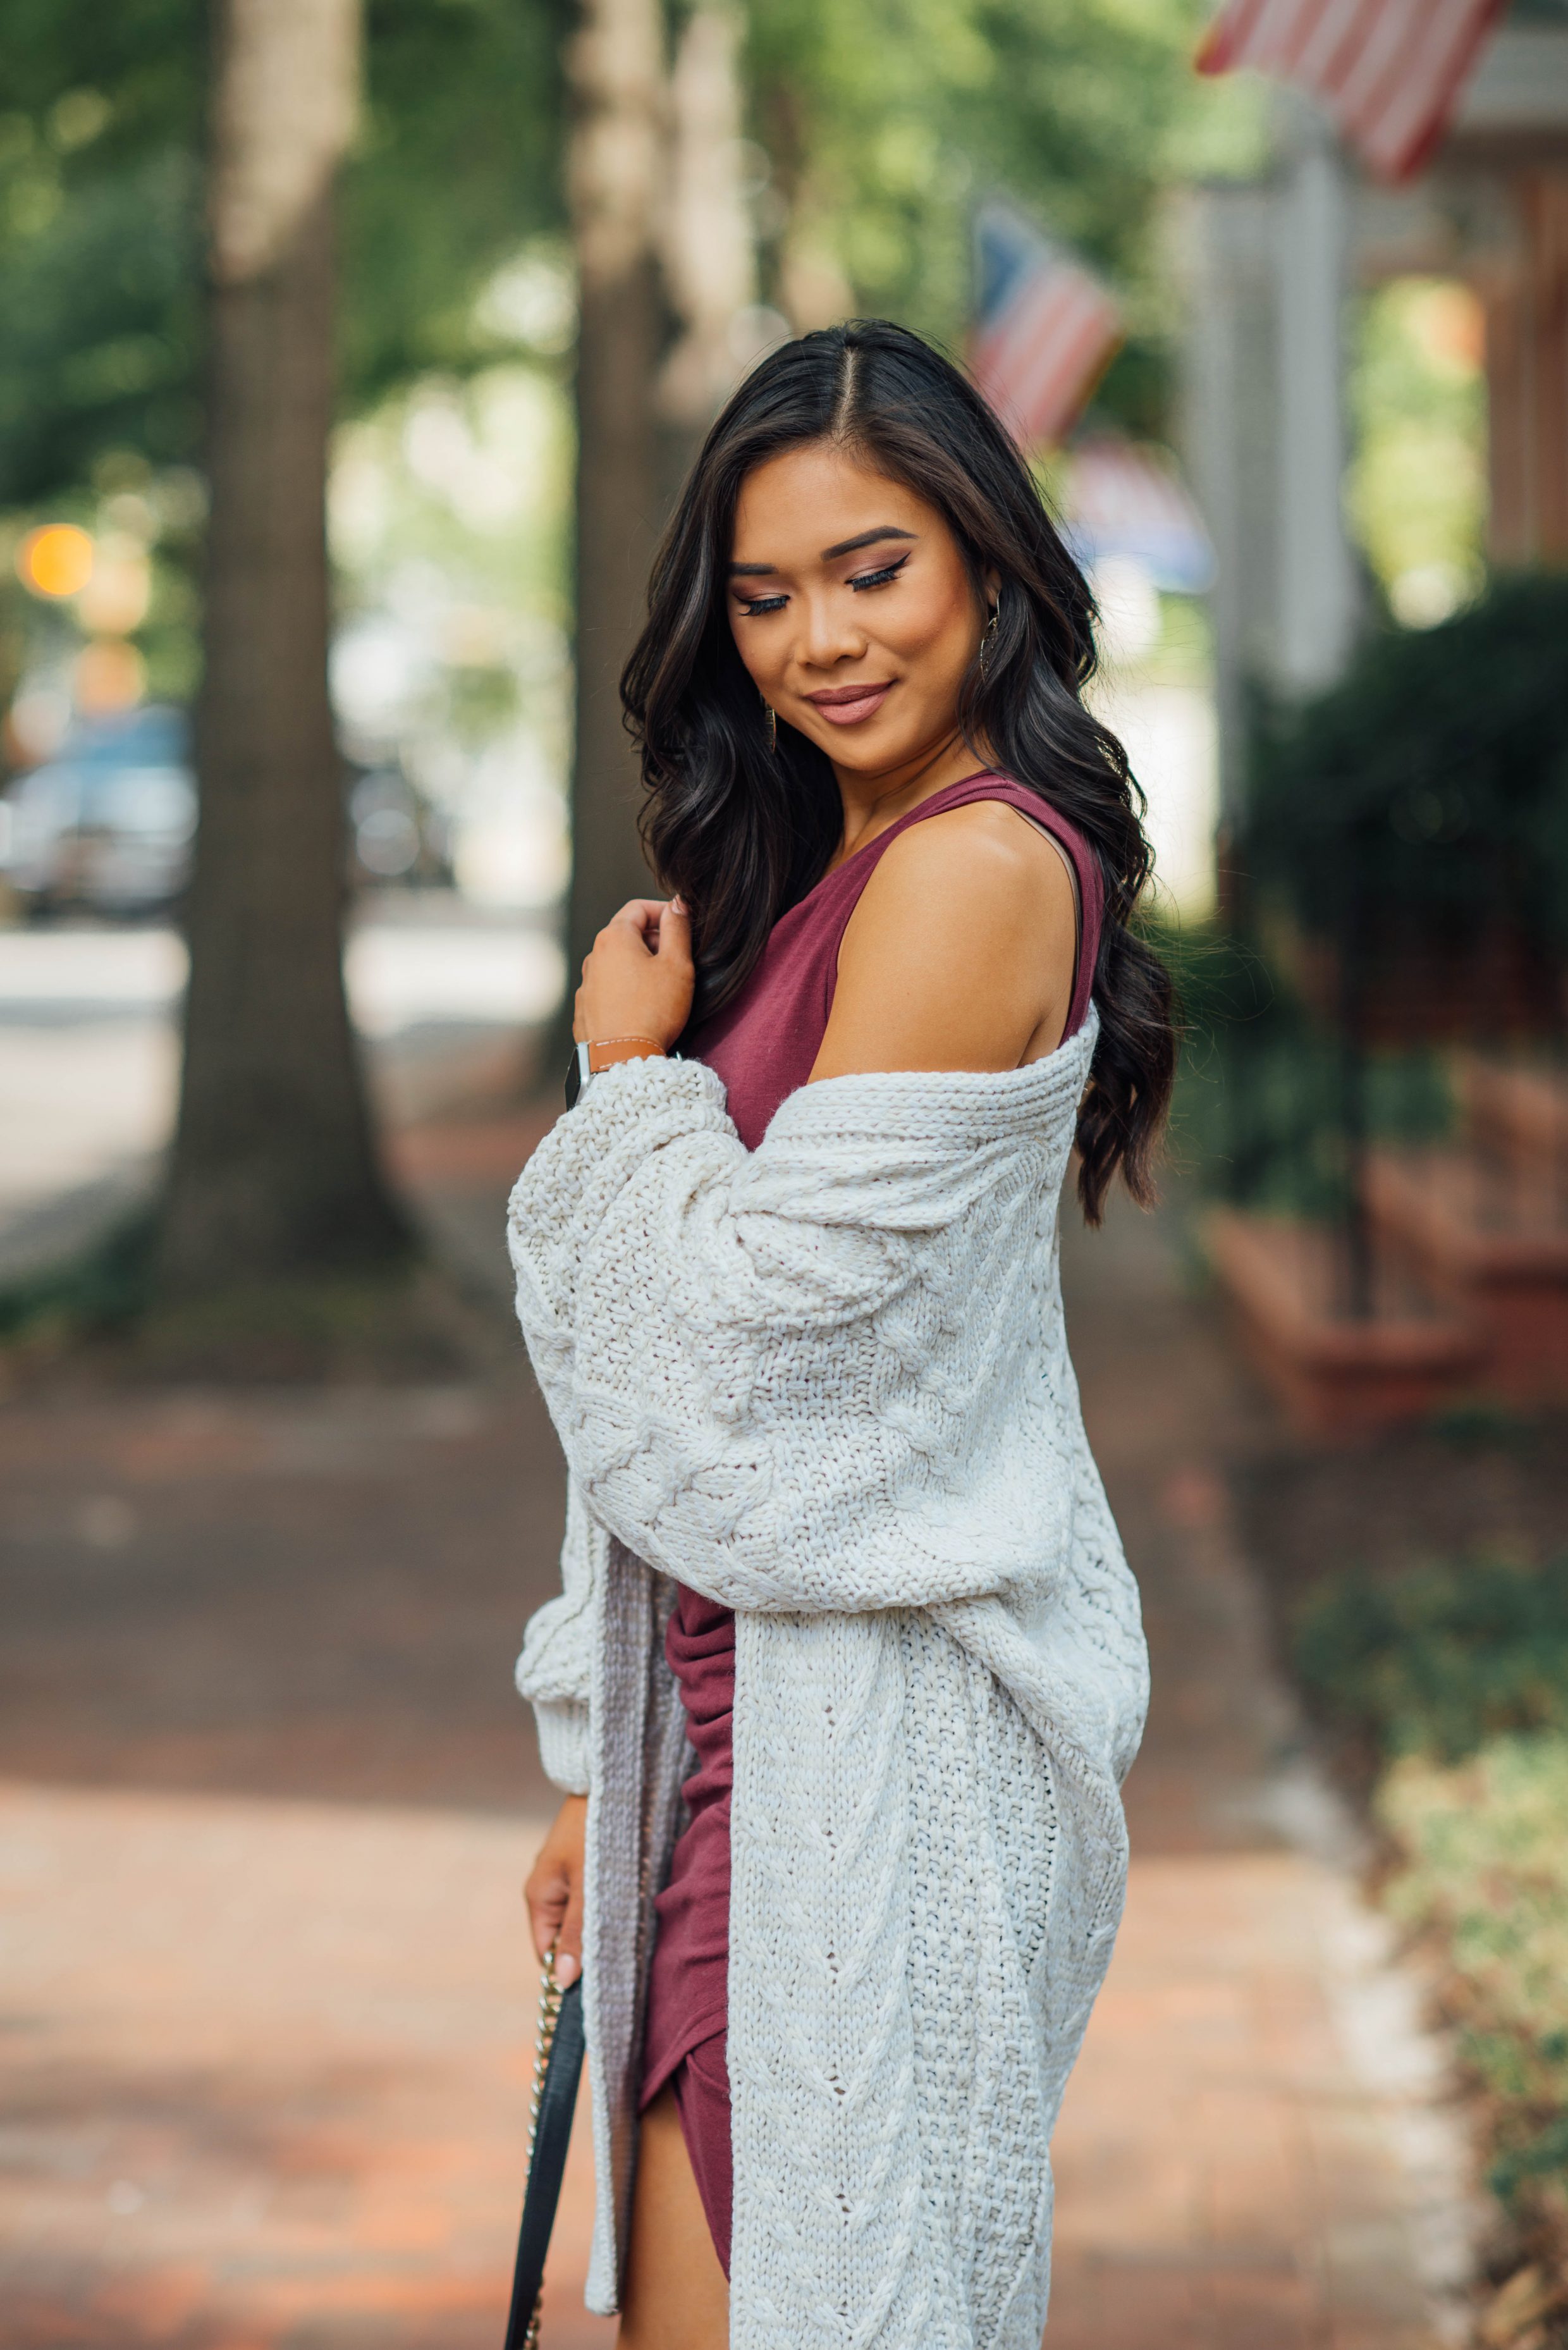 Blogger Hoang-Kim shares her essentials for fall including an oversized cardigan